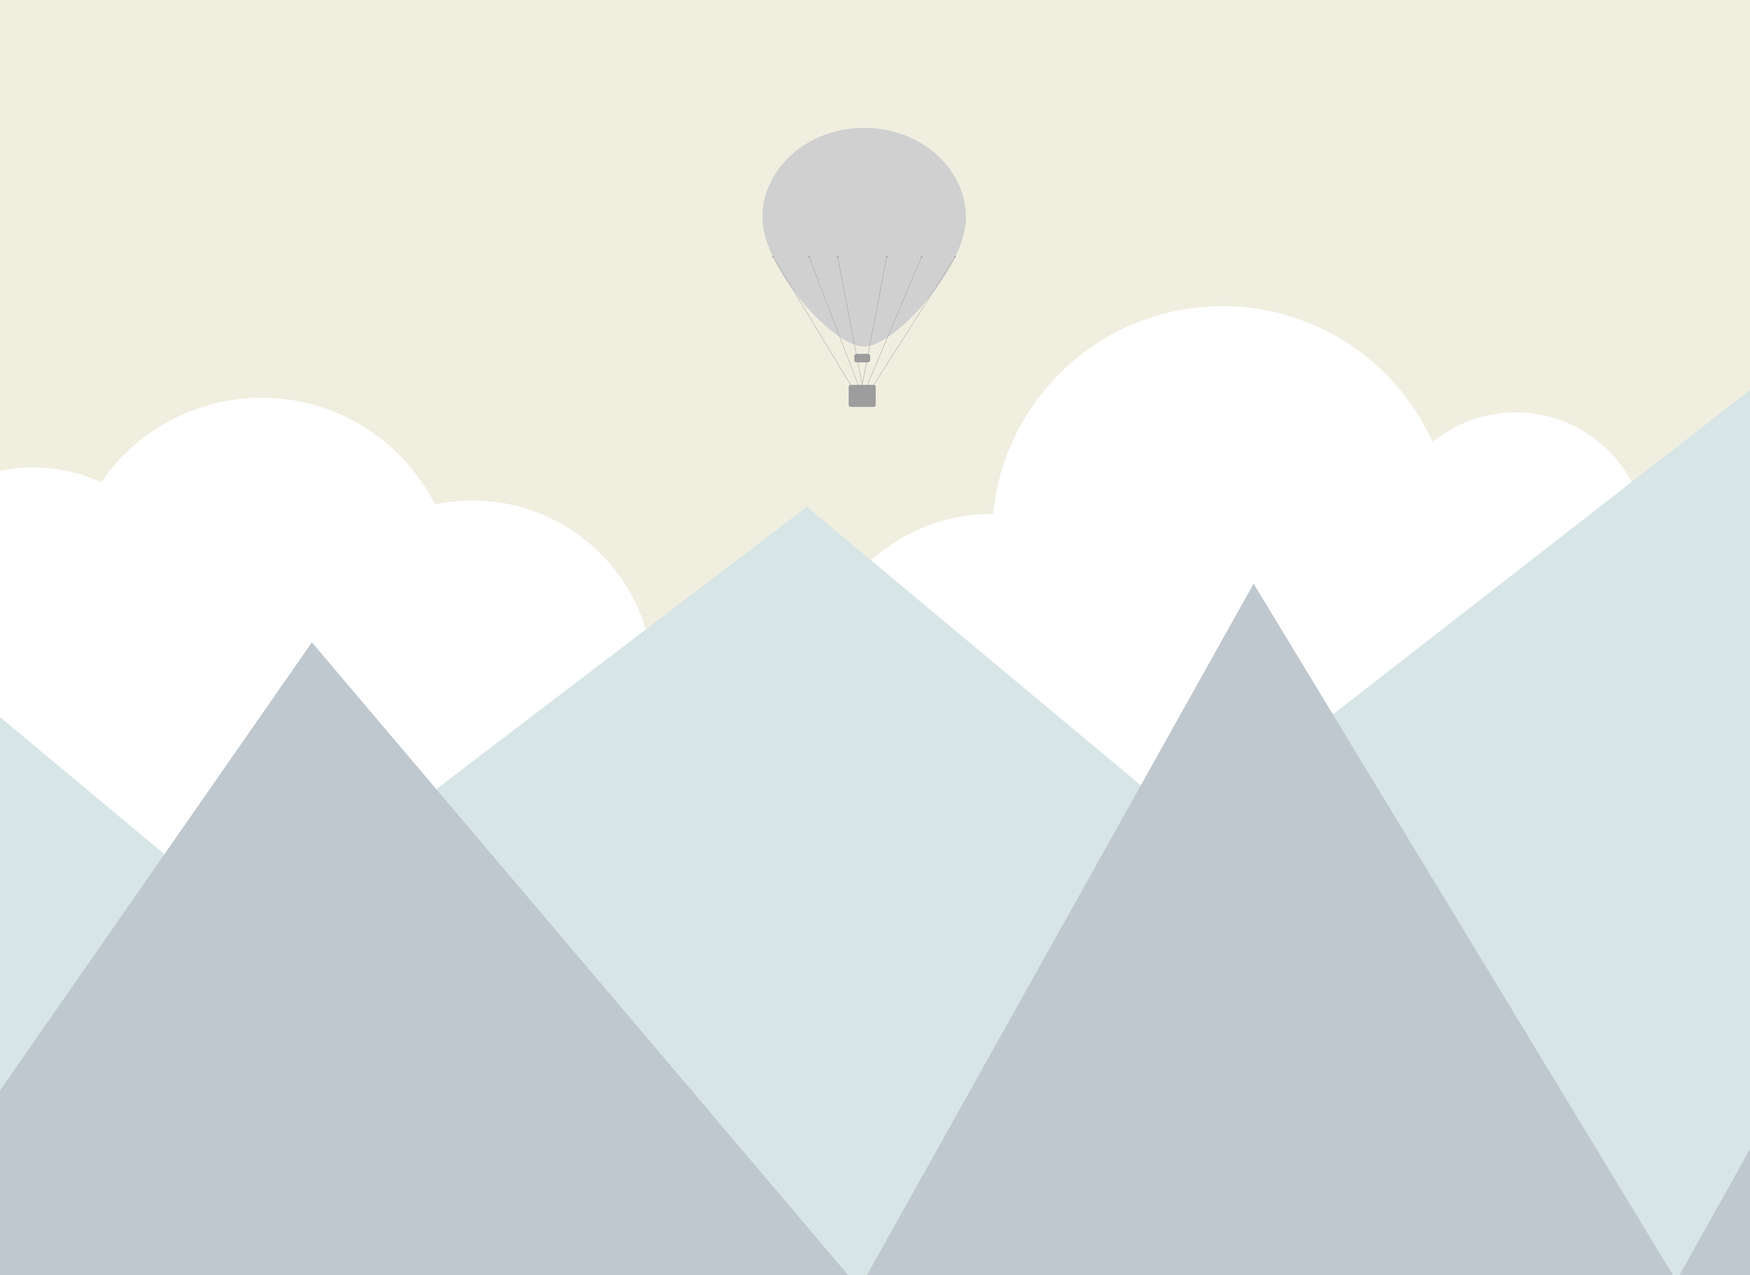             Nursery Mountains with Clouds and Hot Air Balloon Wallpaper - Yellow, Green, Grey
        